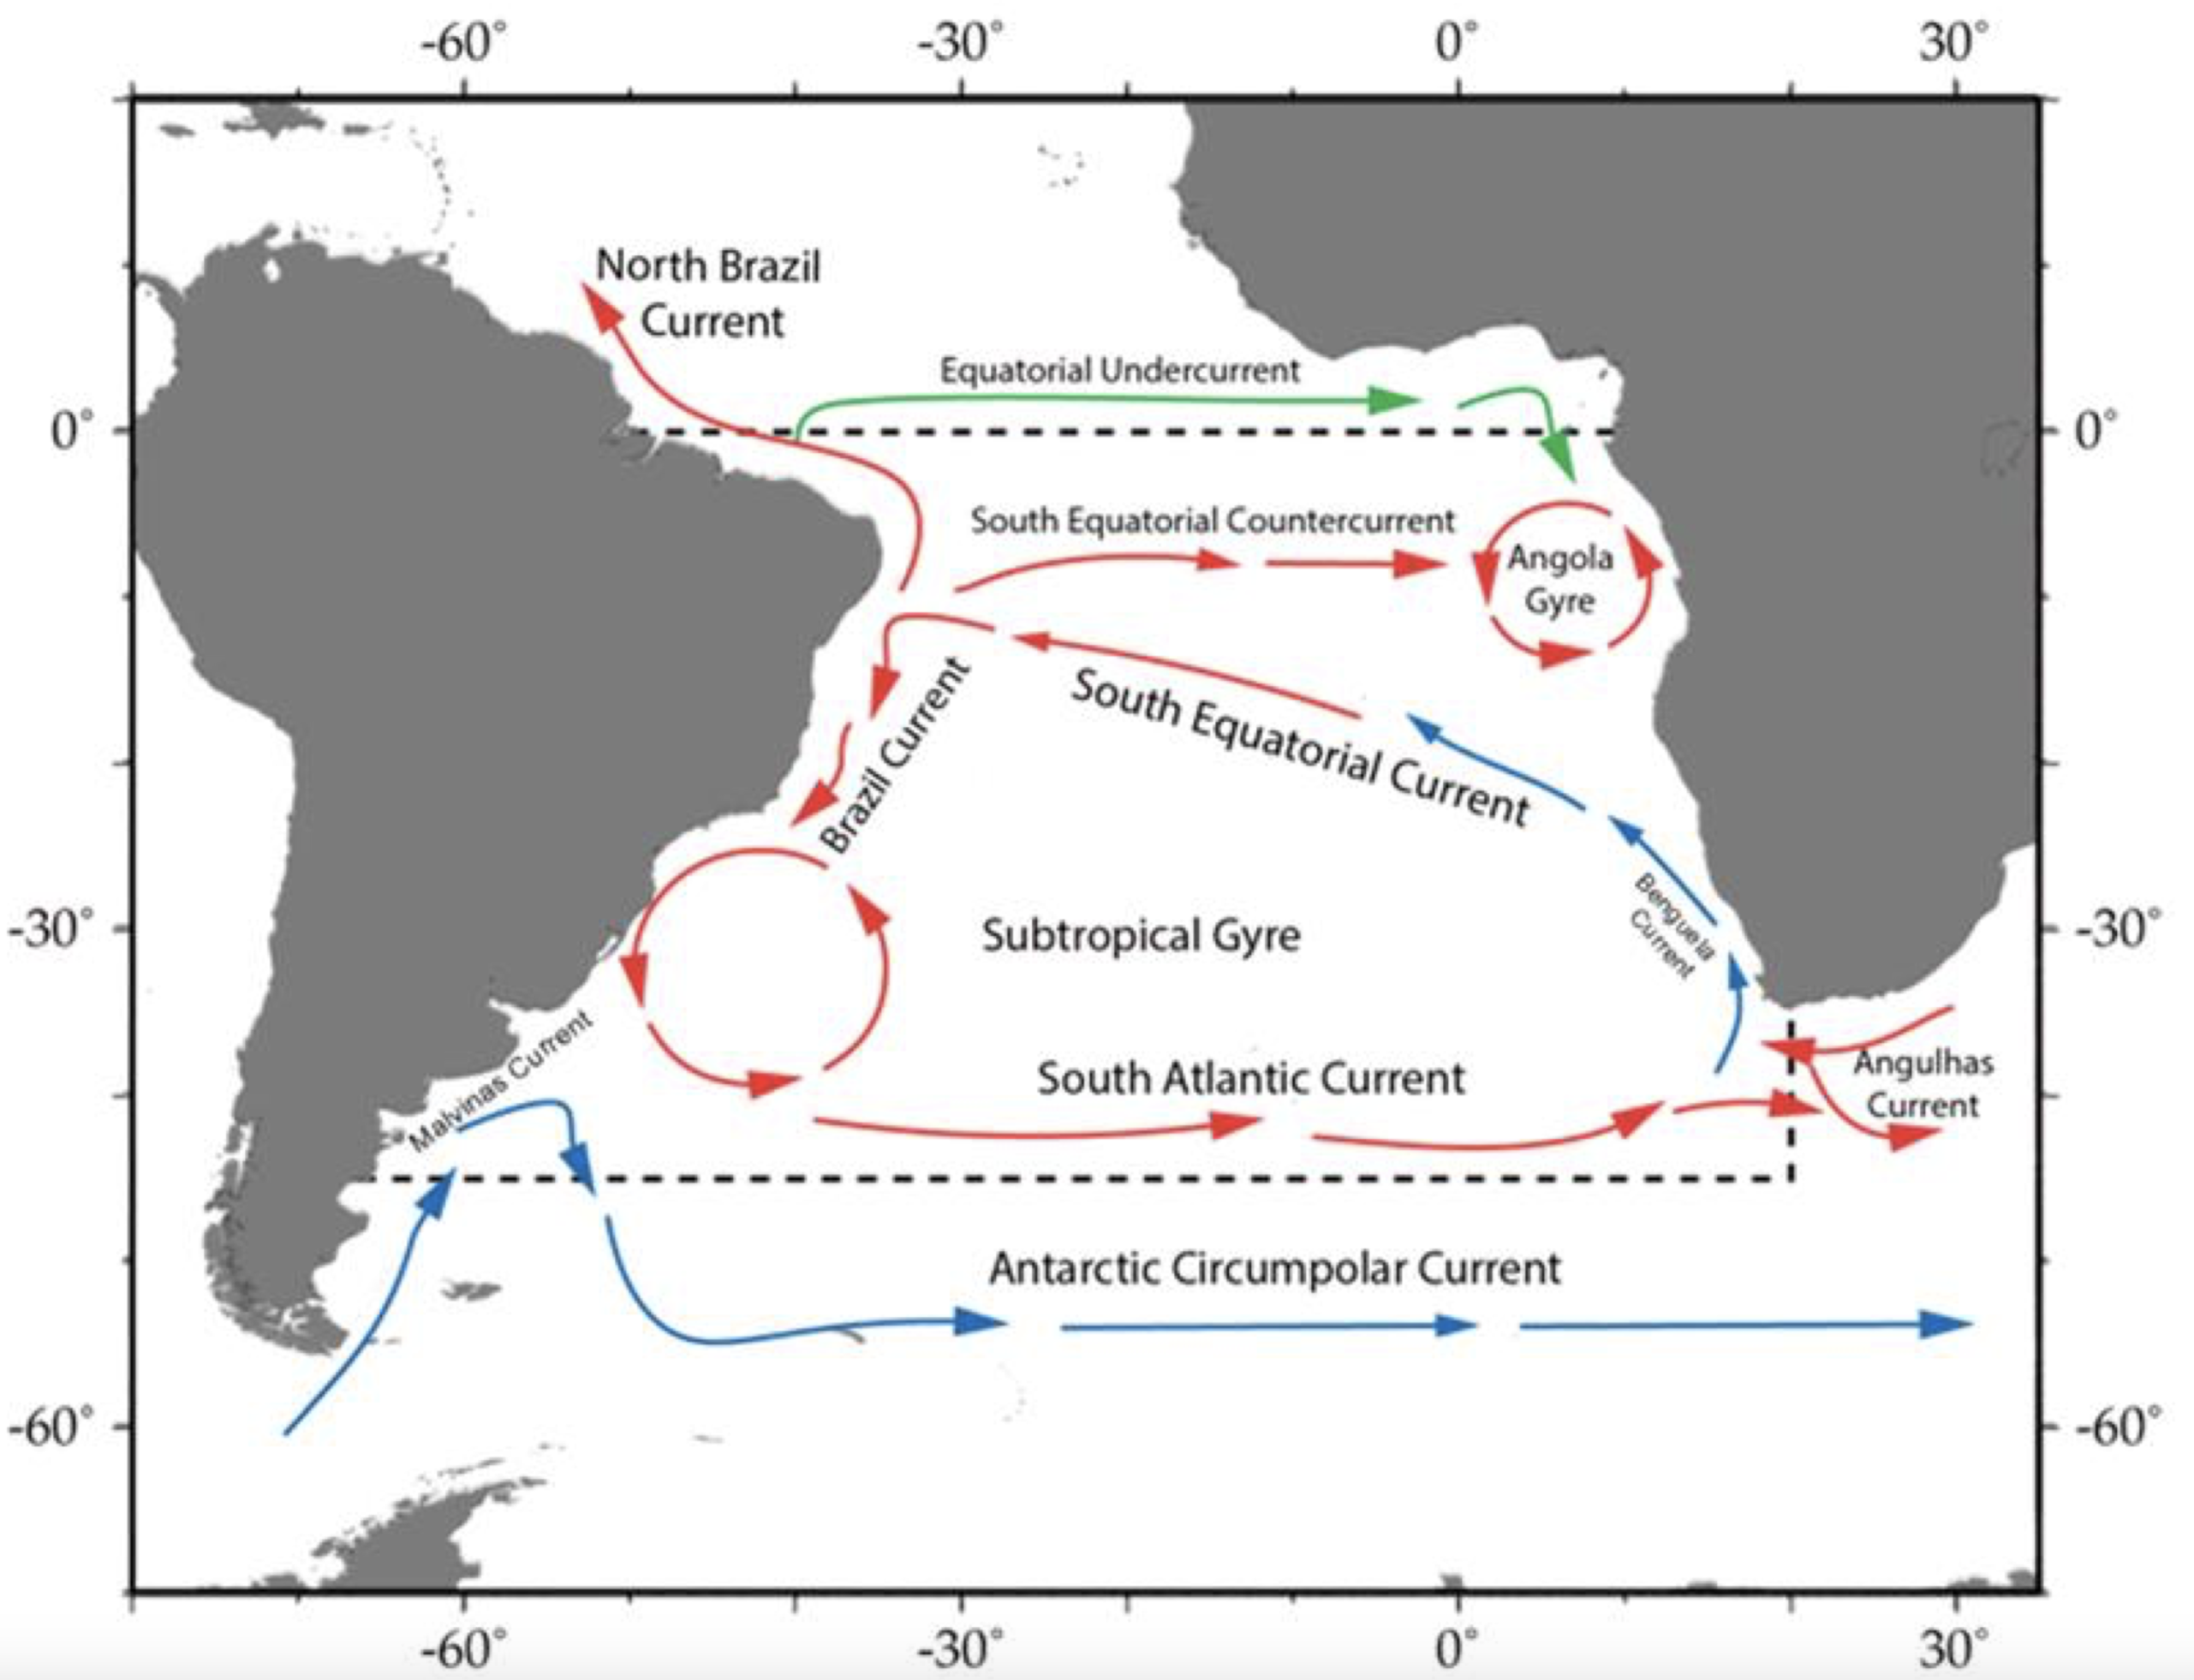 Heat, salt and mass transport in the South Atlantic